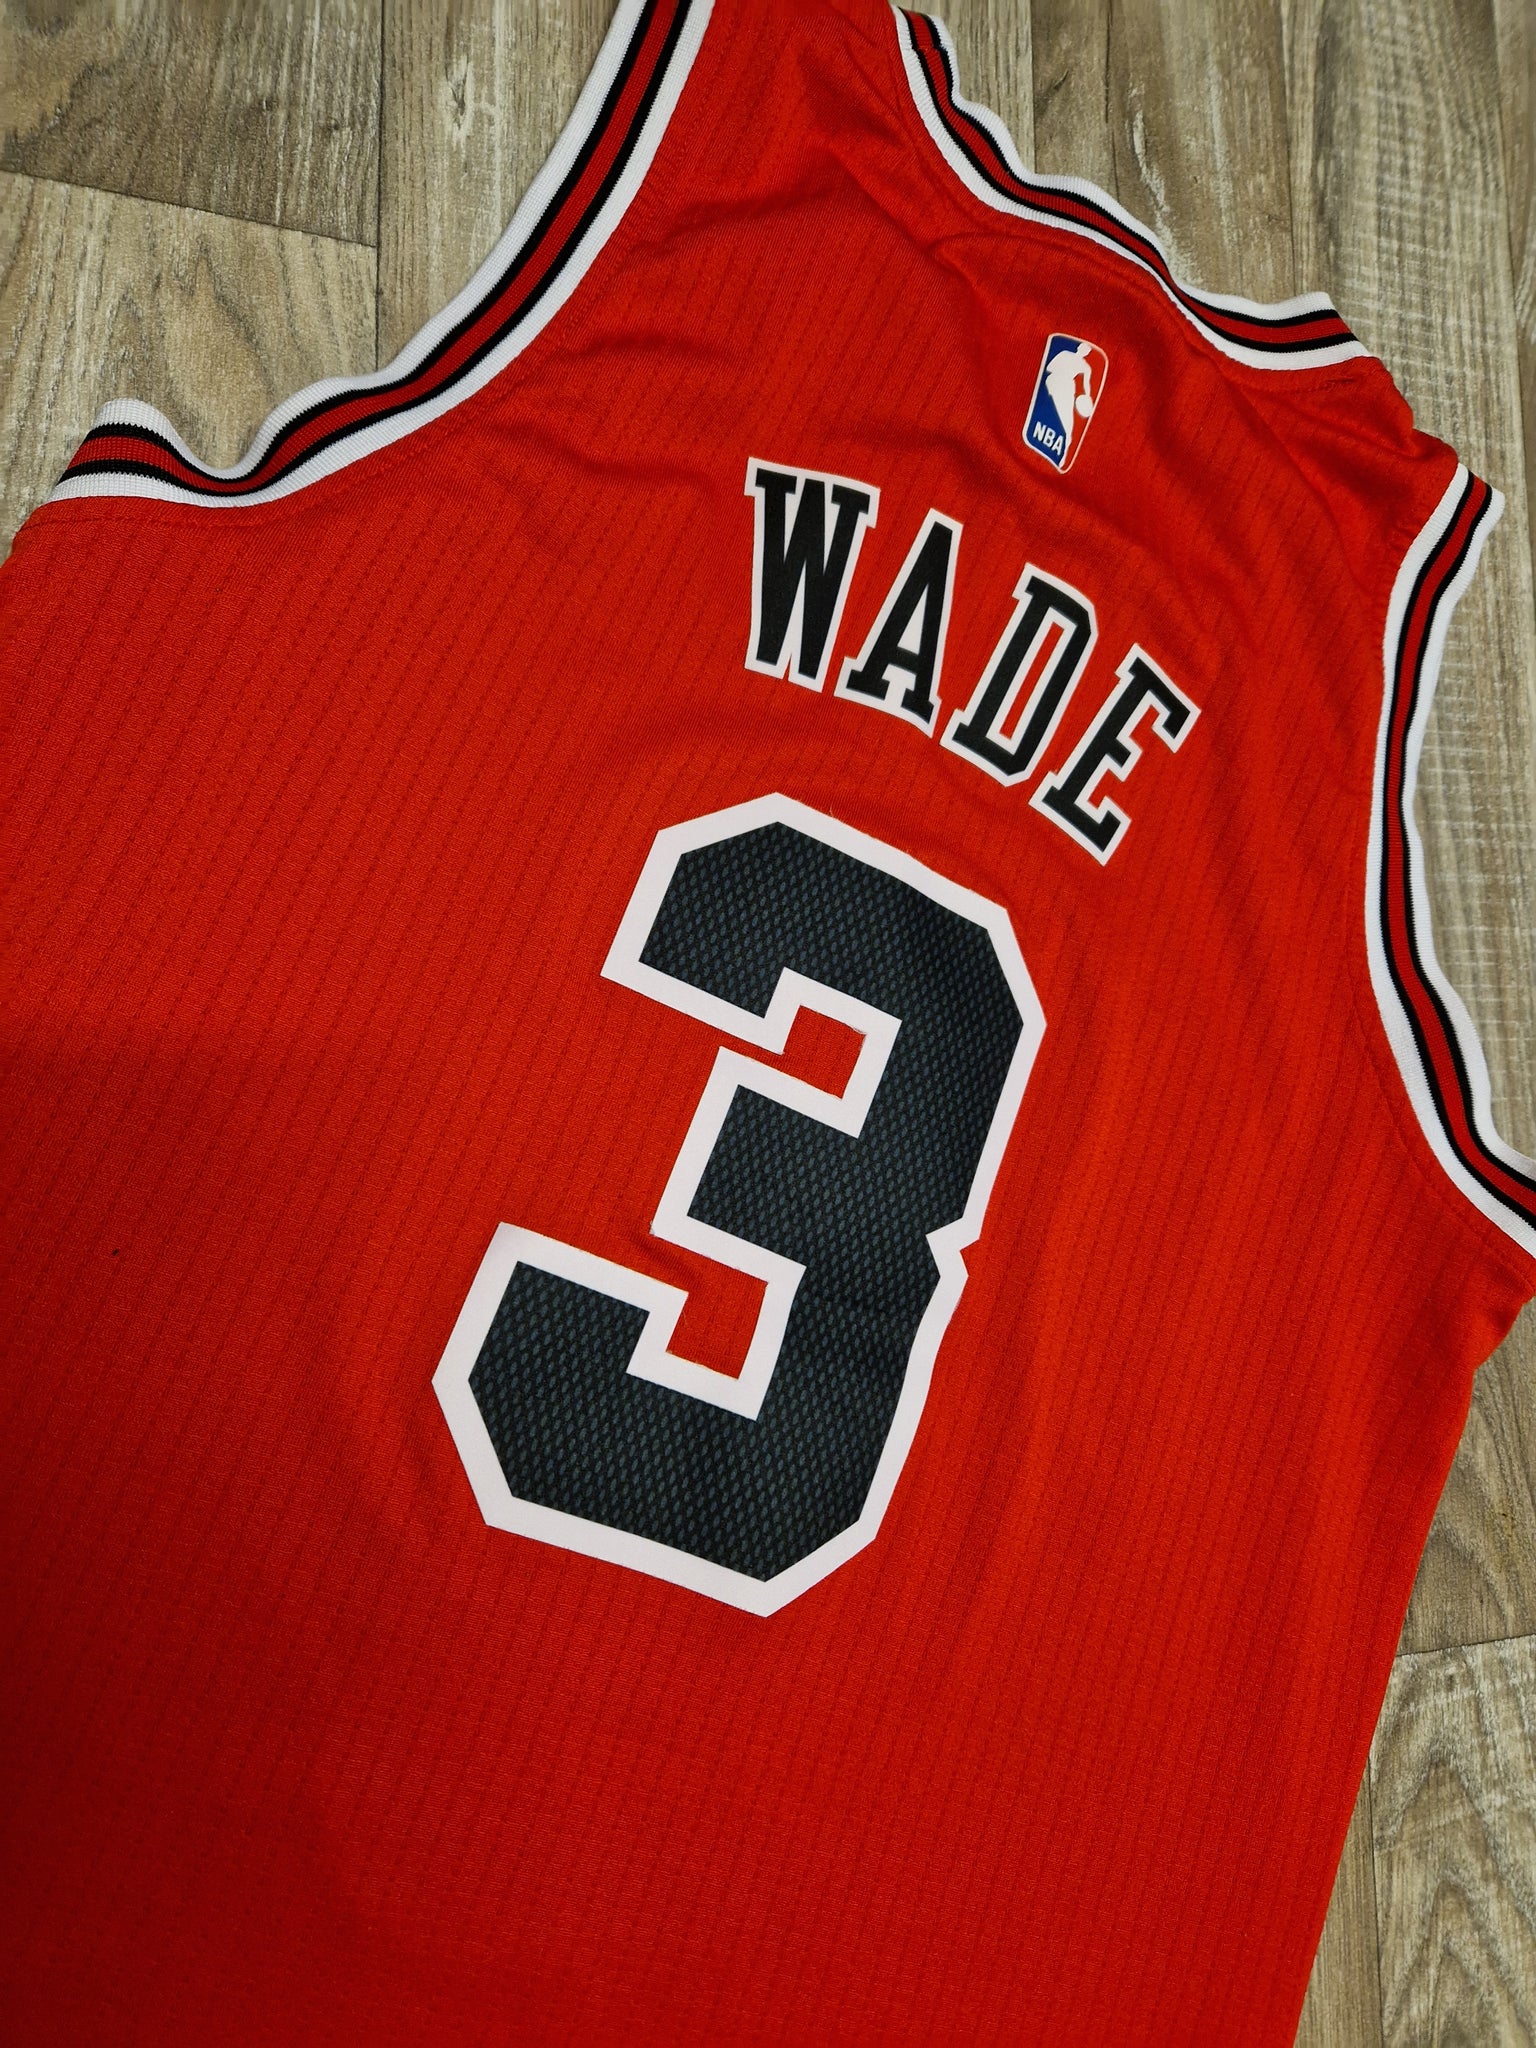 Chicago Bulls Basketball Jersey For Youth, Women, or Men